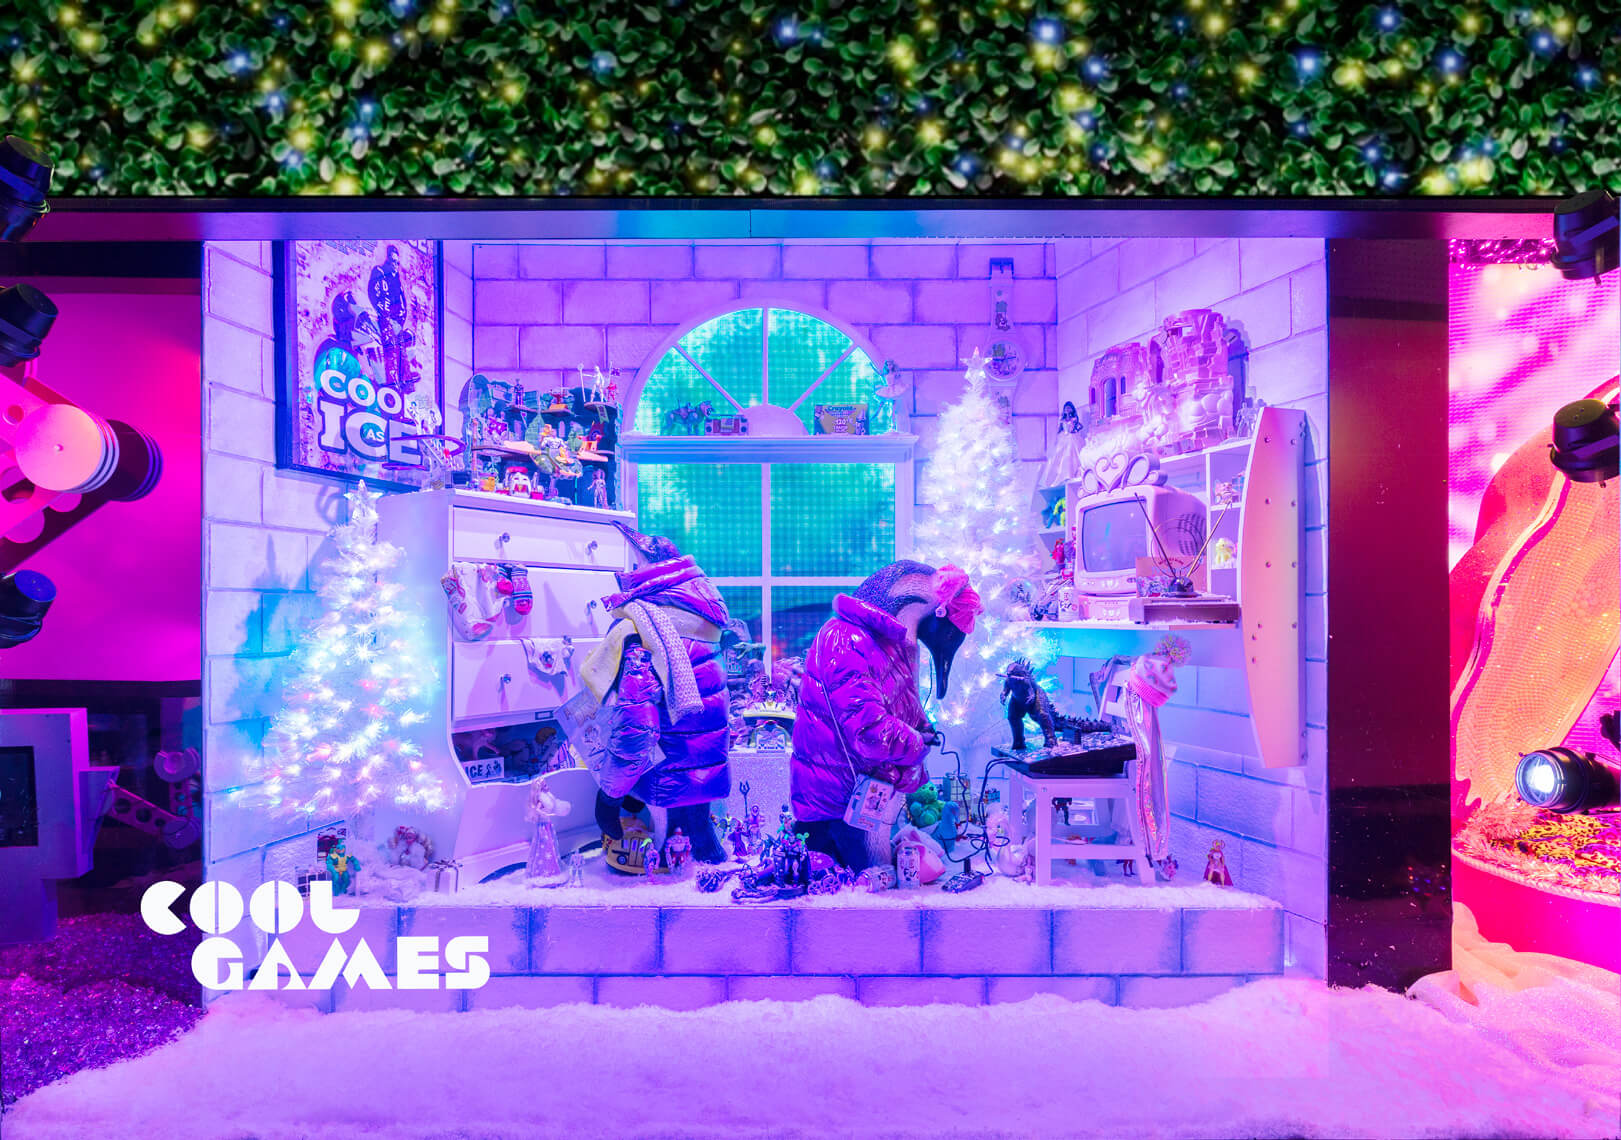 Enjoy Meticulously Designed Manhattan Store Windows During The Holiday  Season - 27 East